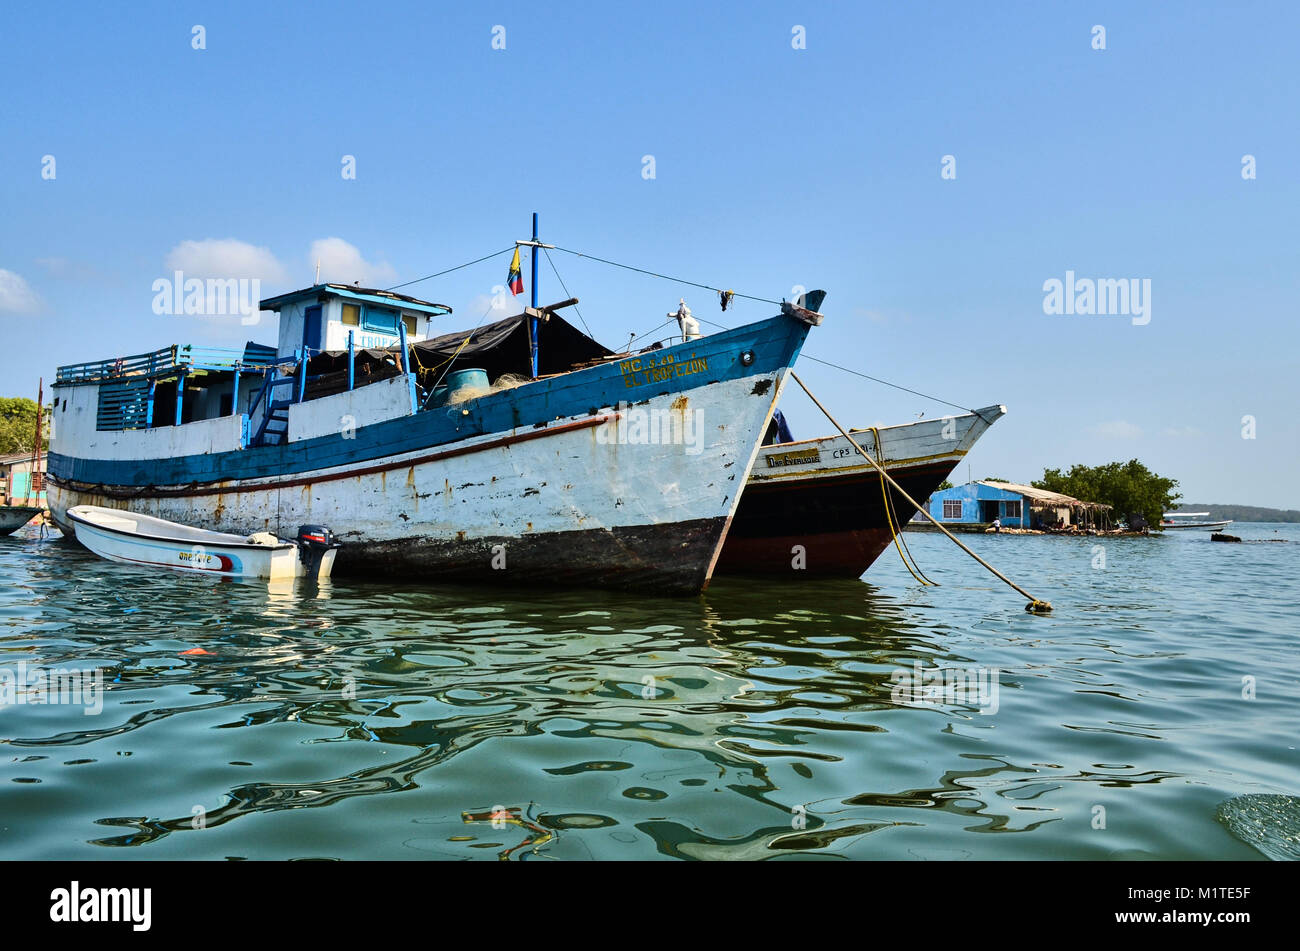 BARU, CARTAGENA, COLOMBIA - JANUARY 29, 2014: Anchored boats in a dock in Cartagena, seen on a tour way to Baru. Stock Photo